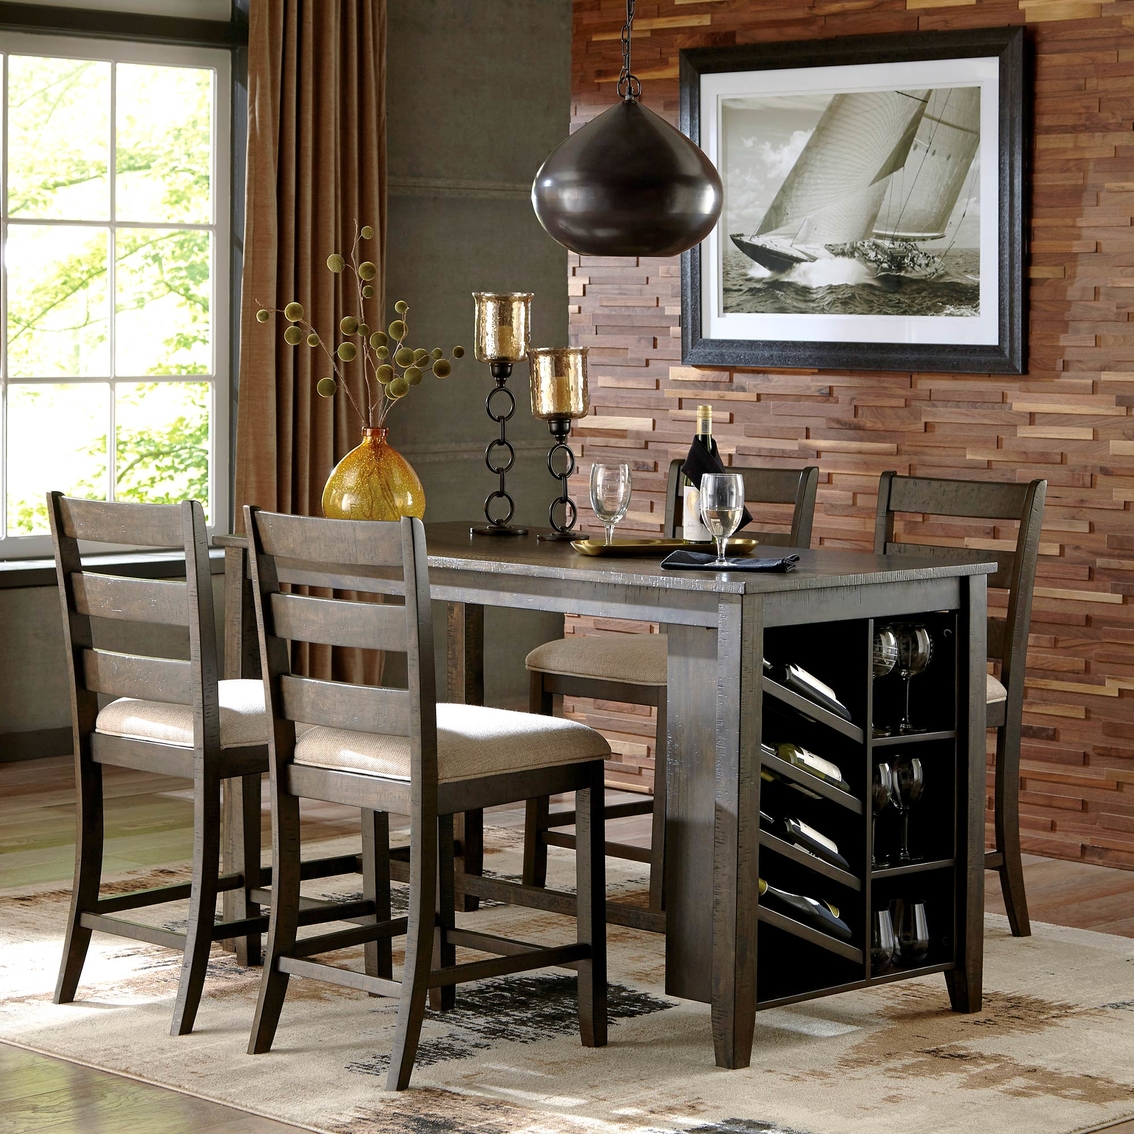 Signature Design by Ashley Rokane Rectangular Counter Table with Storage - Image 2 of 3